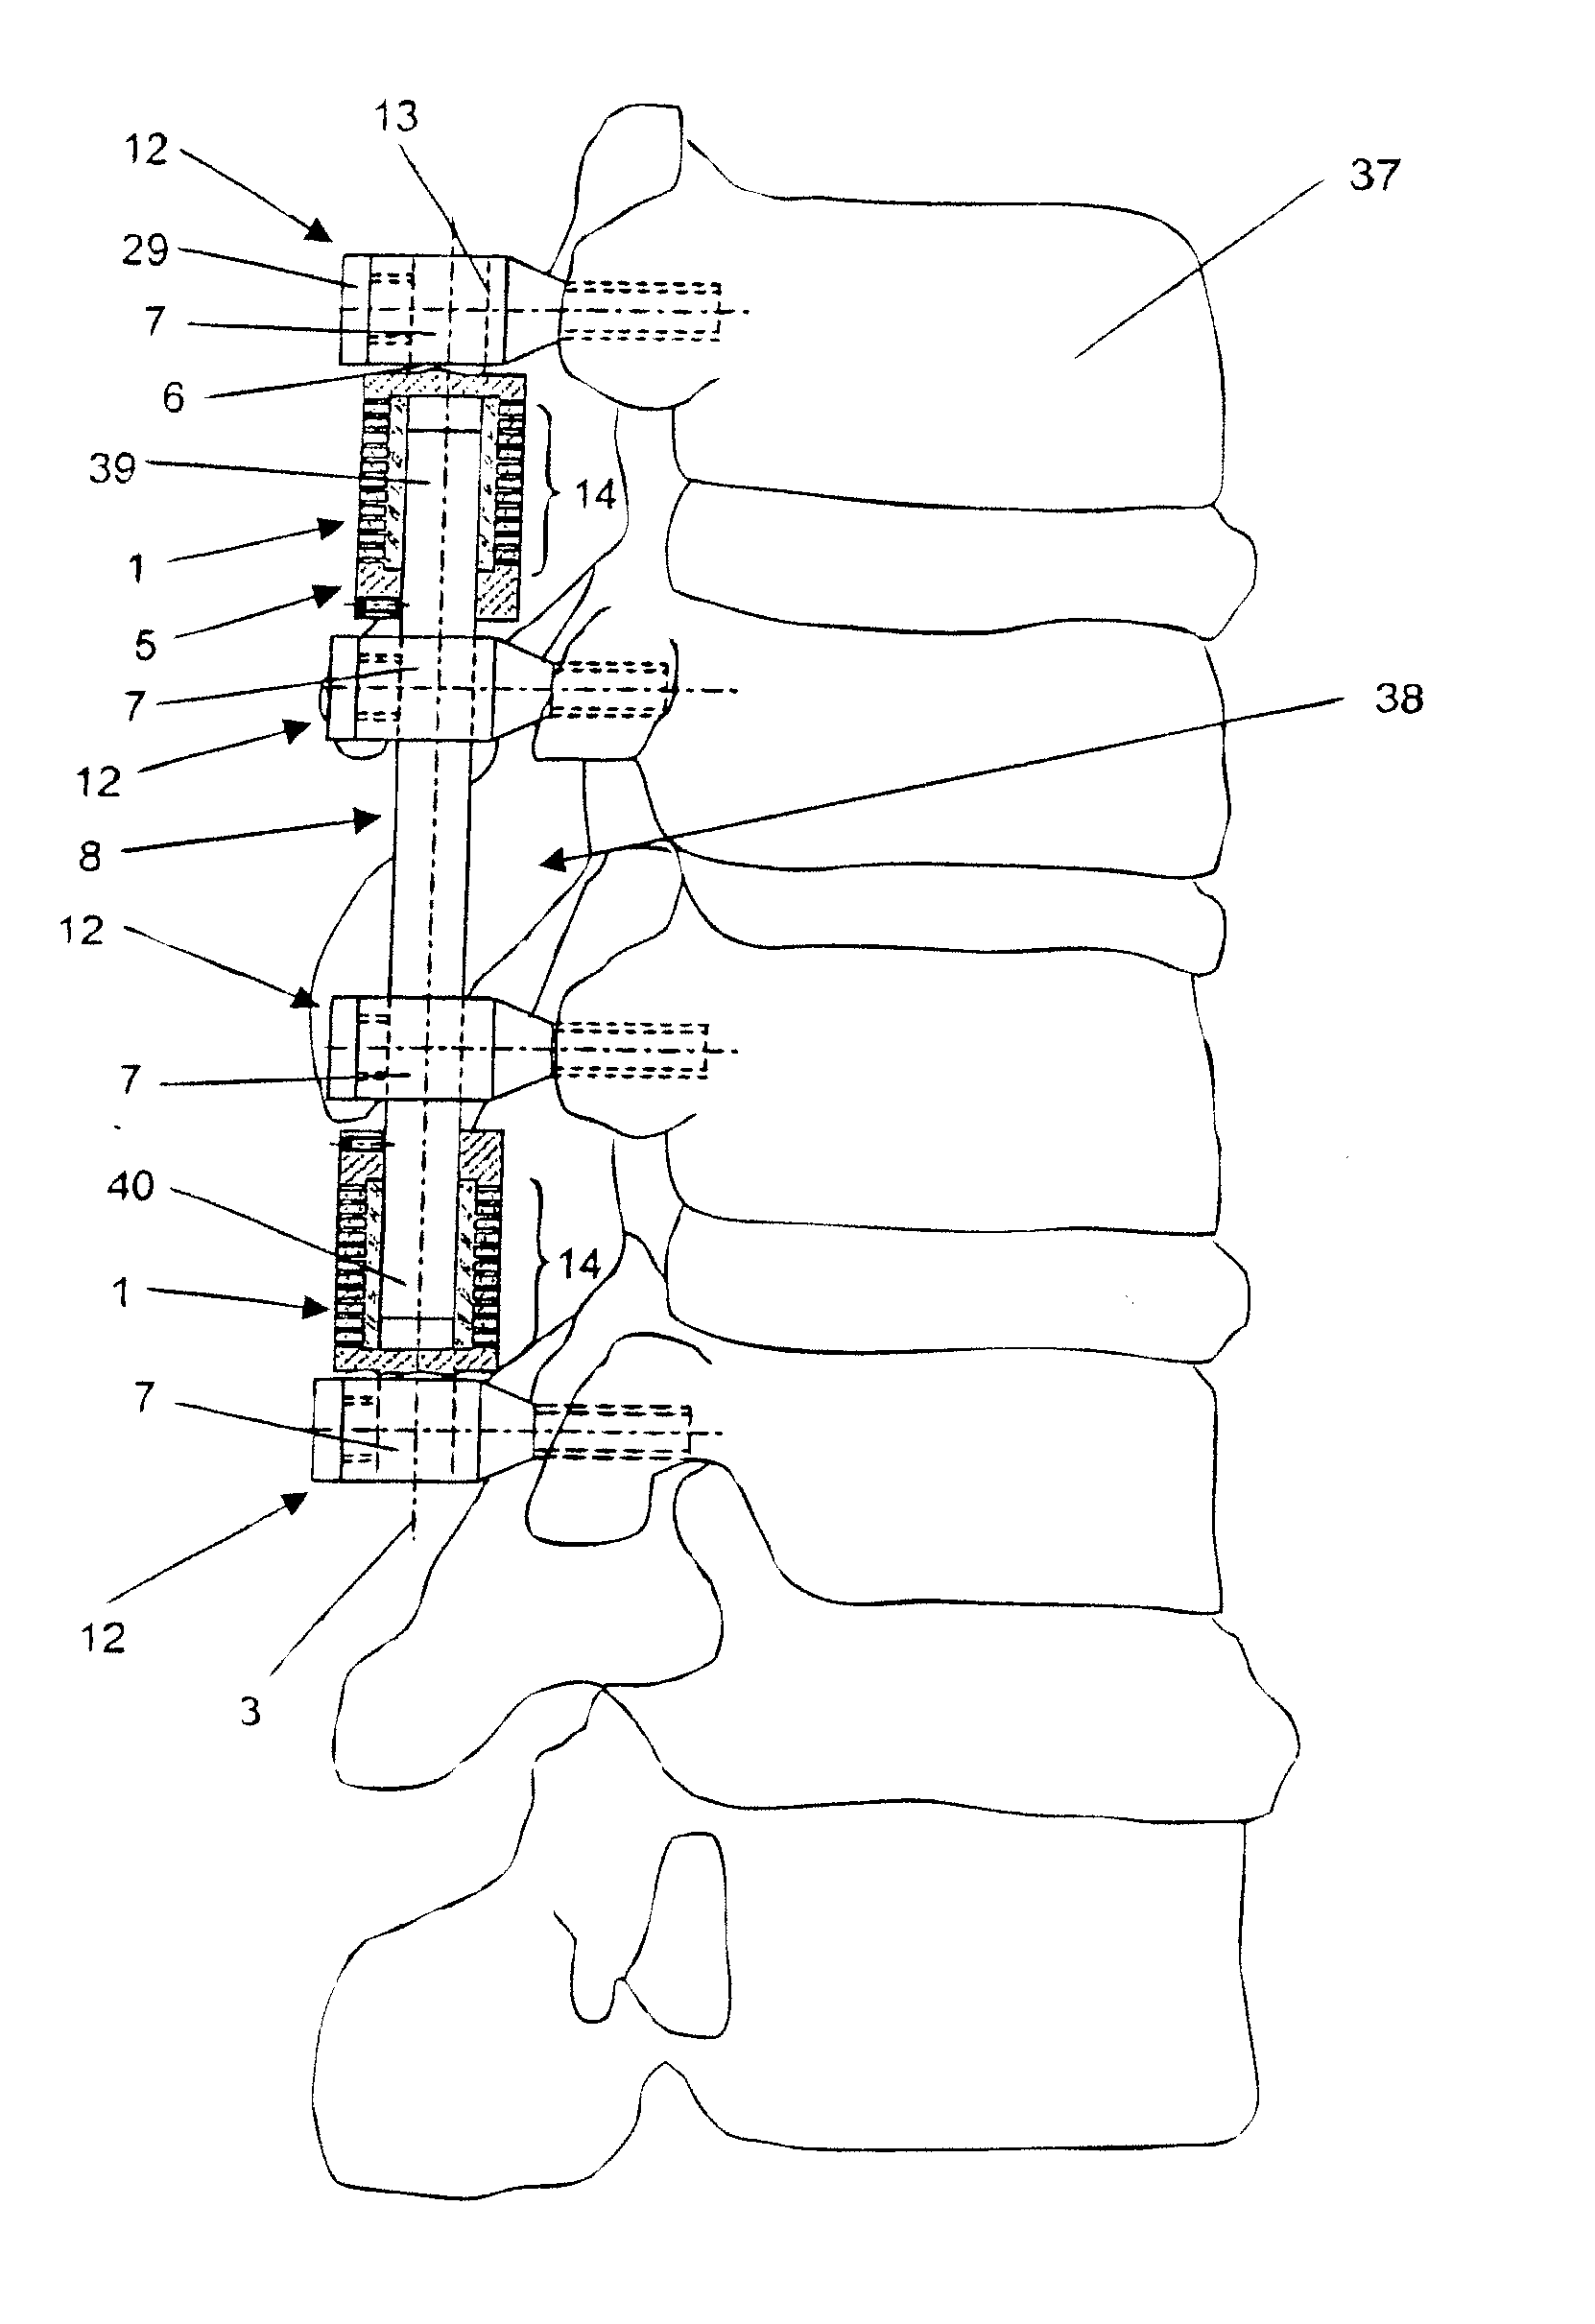 Damping element and device for stabilization of adjacent vertebral bodies